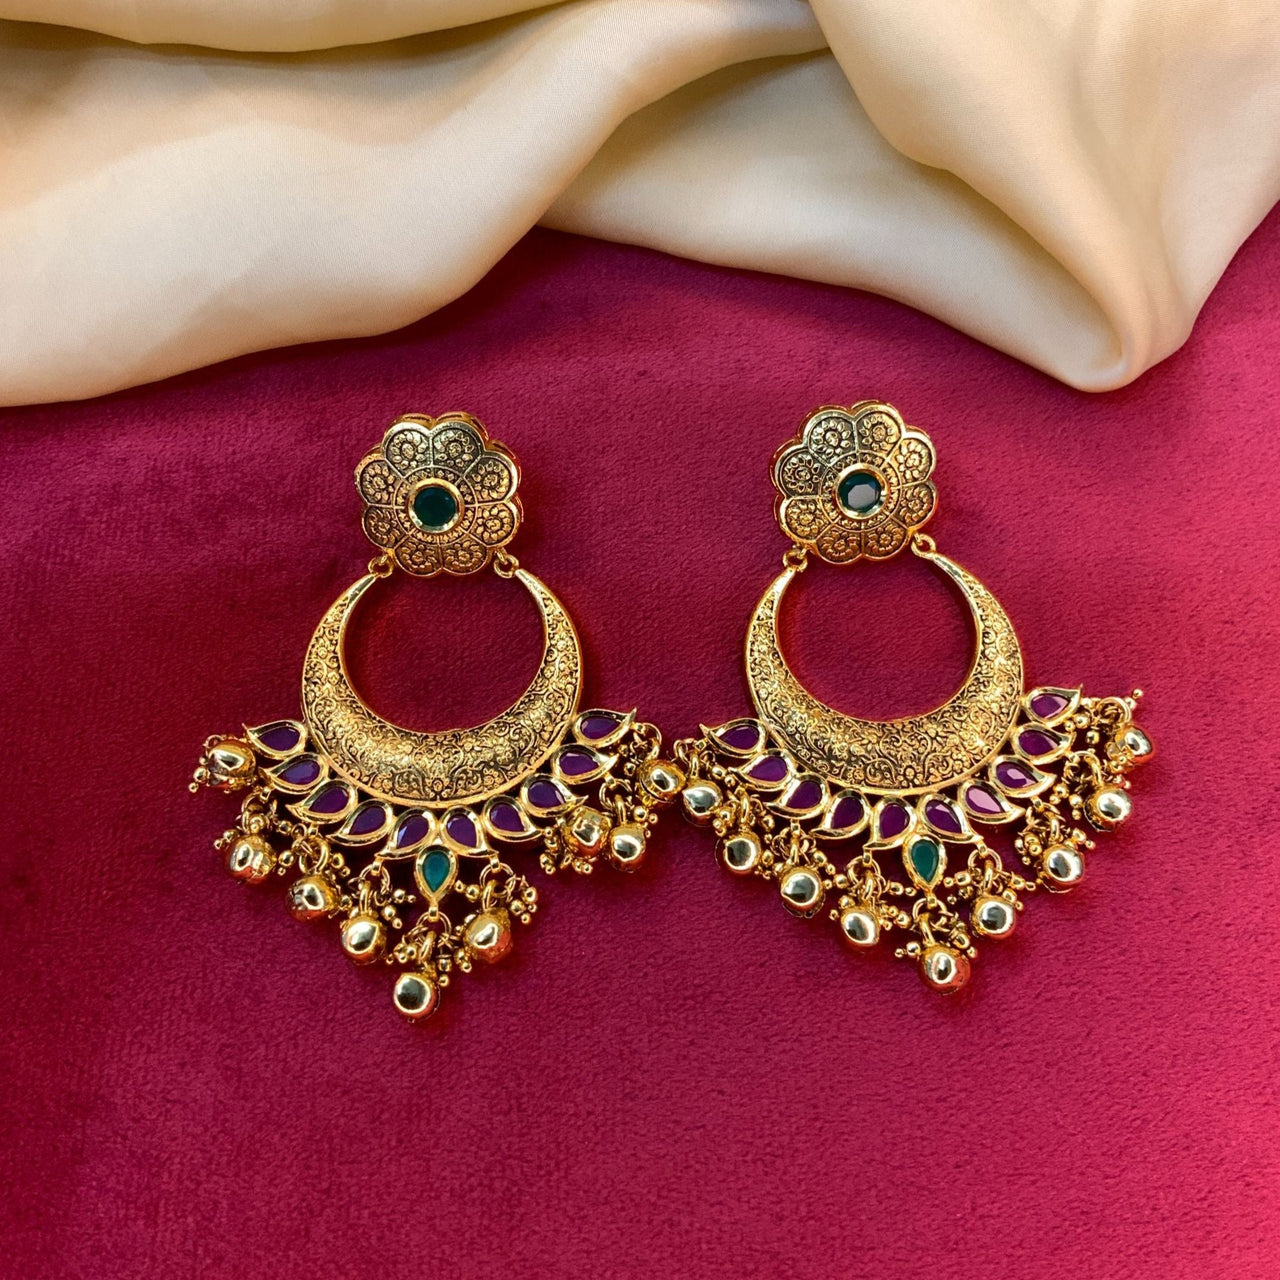 Antique Gold Floral Chandbali Earring